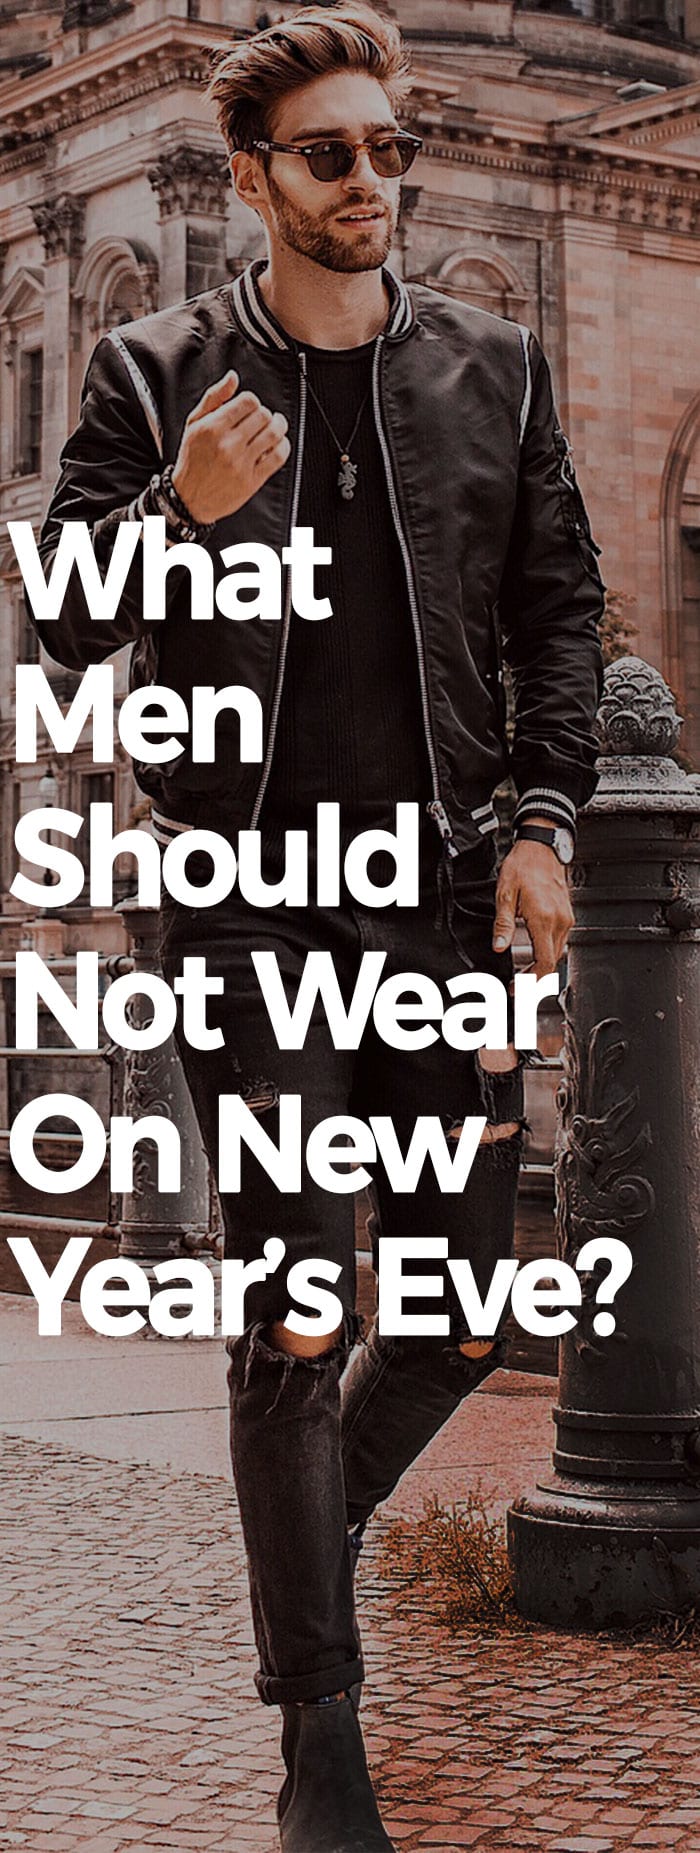 What Men Should Not Wear On New Year's Eve